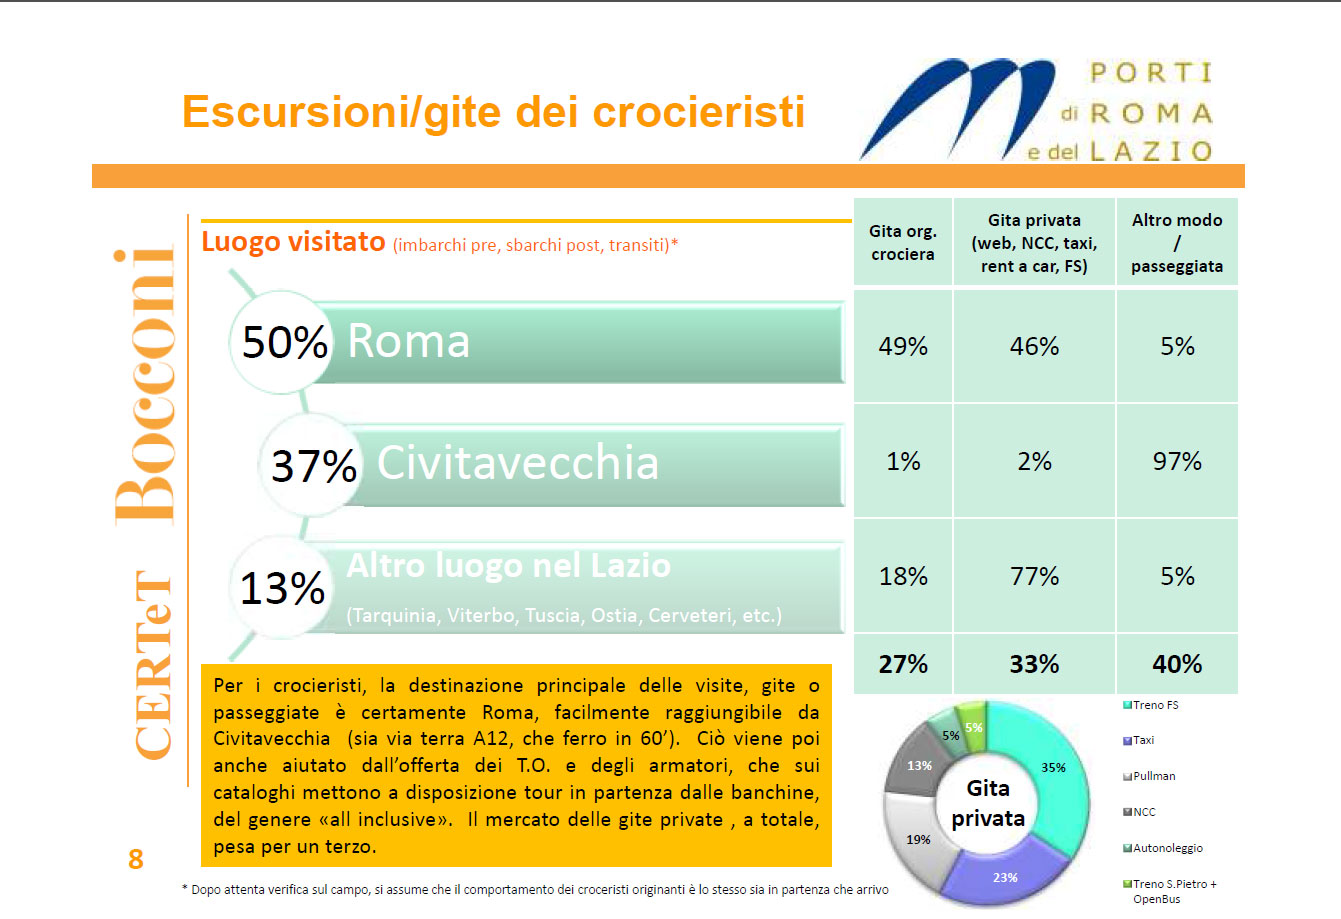 50% of over 2 million cruise passengers go to Roma, 37% stays in Civitavecchia and 13% chooses other destinations in the surrounding area